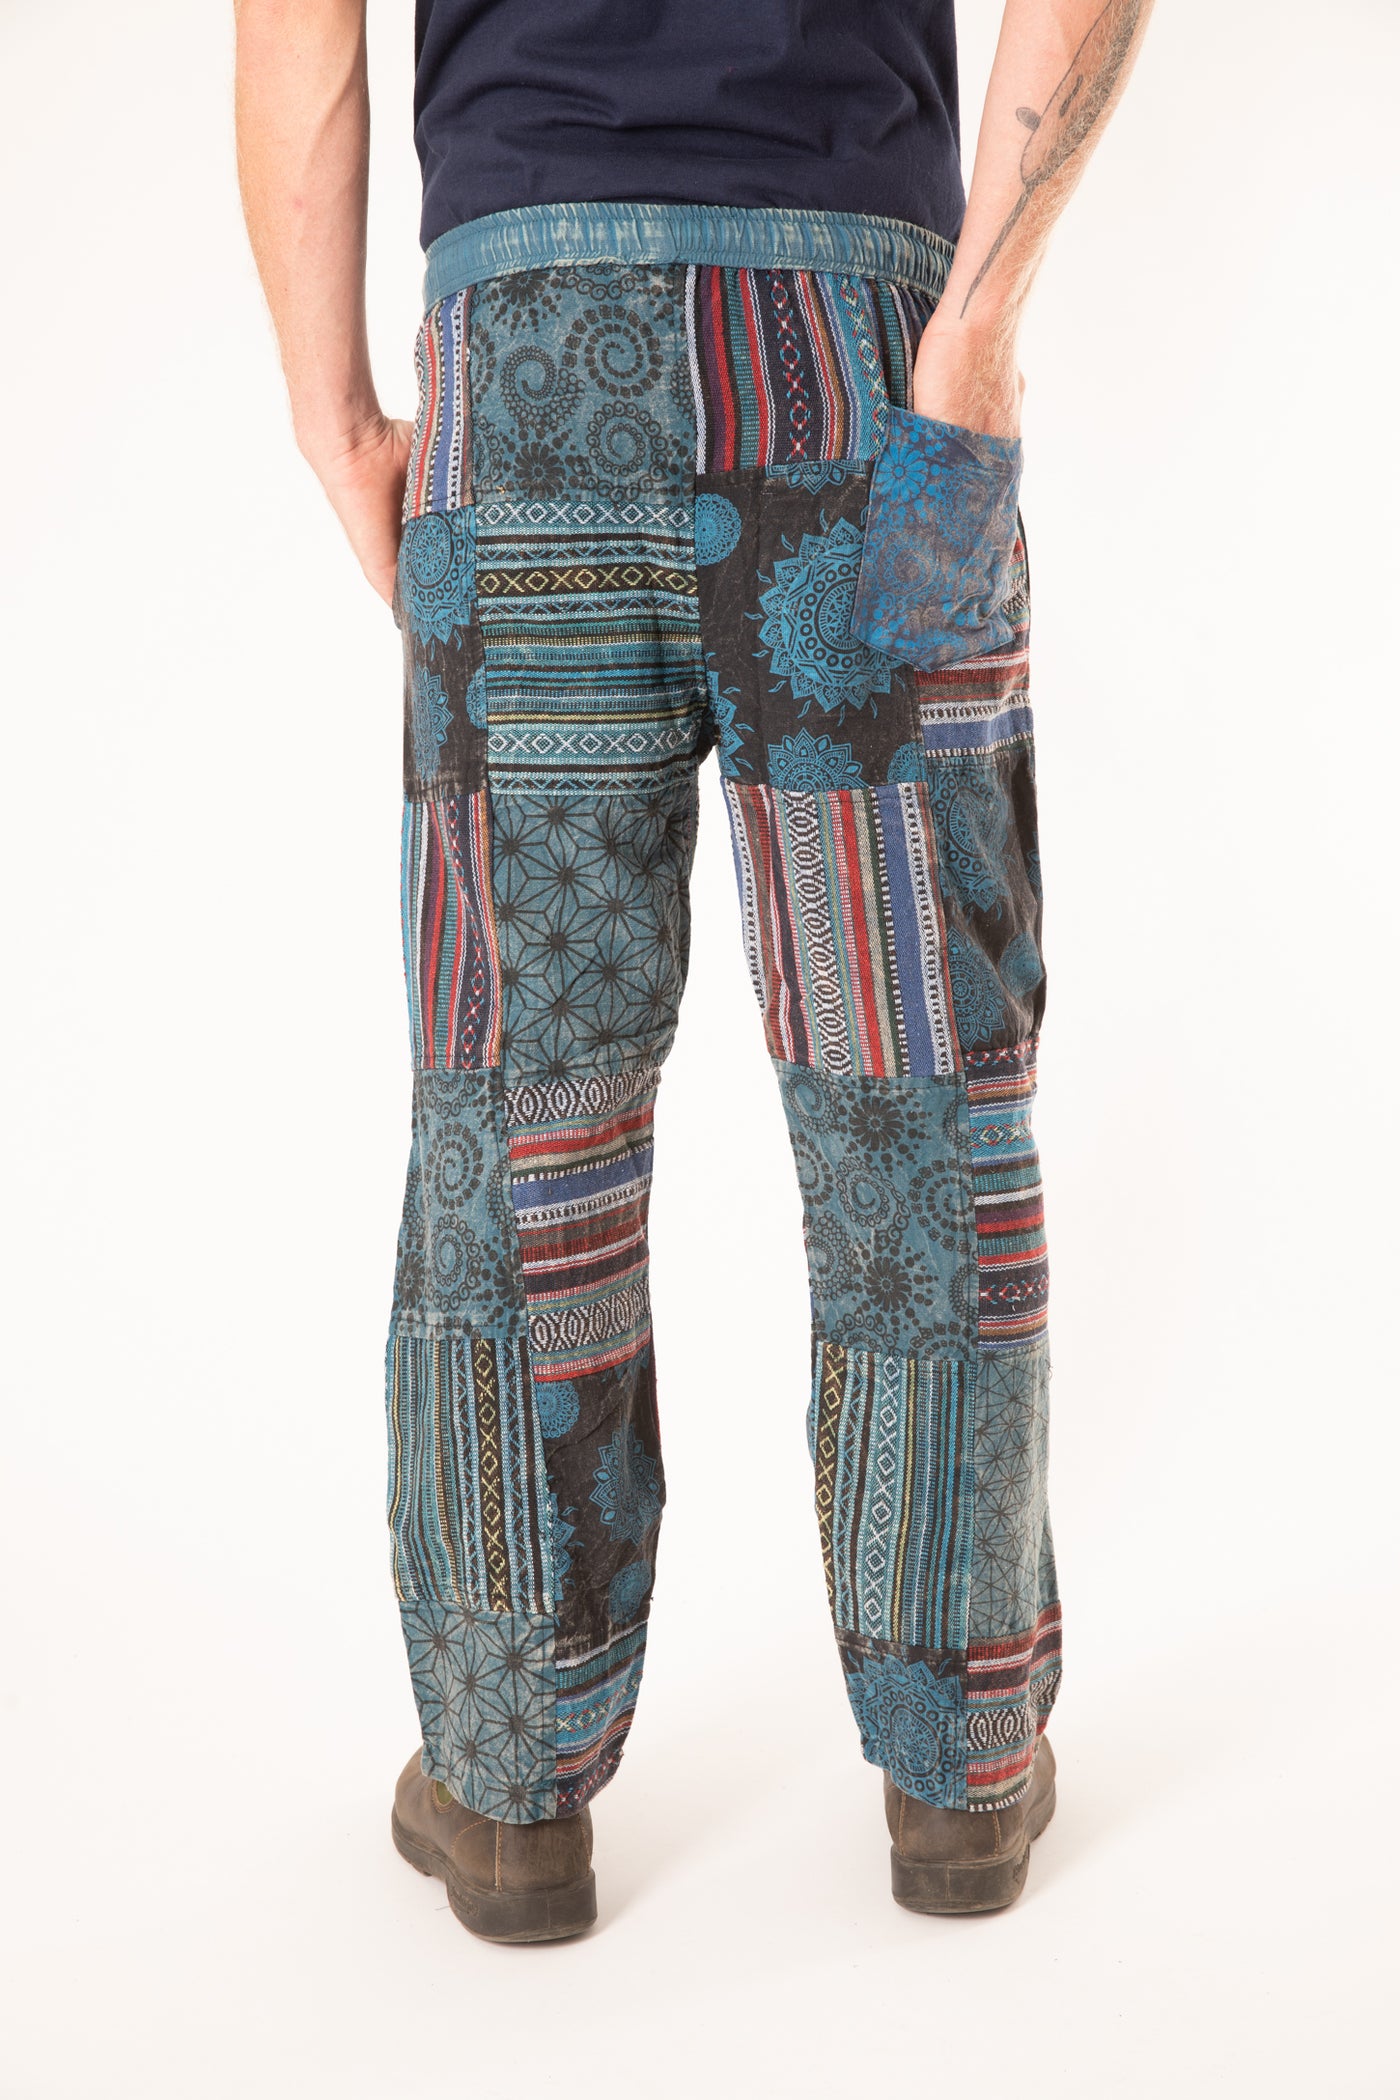 Nepalese Heavy Weight Patchwork Pants • Hippy Clothing by HIPPY BUDDY